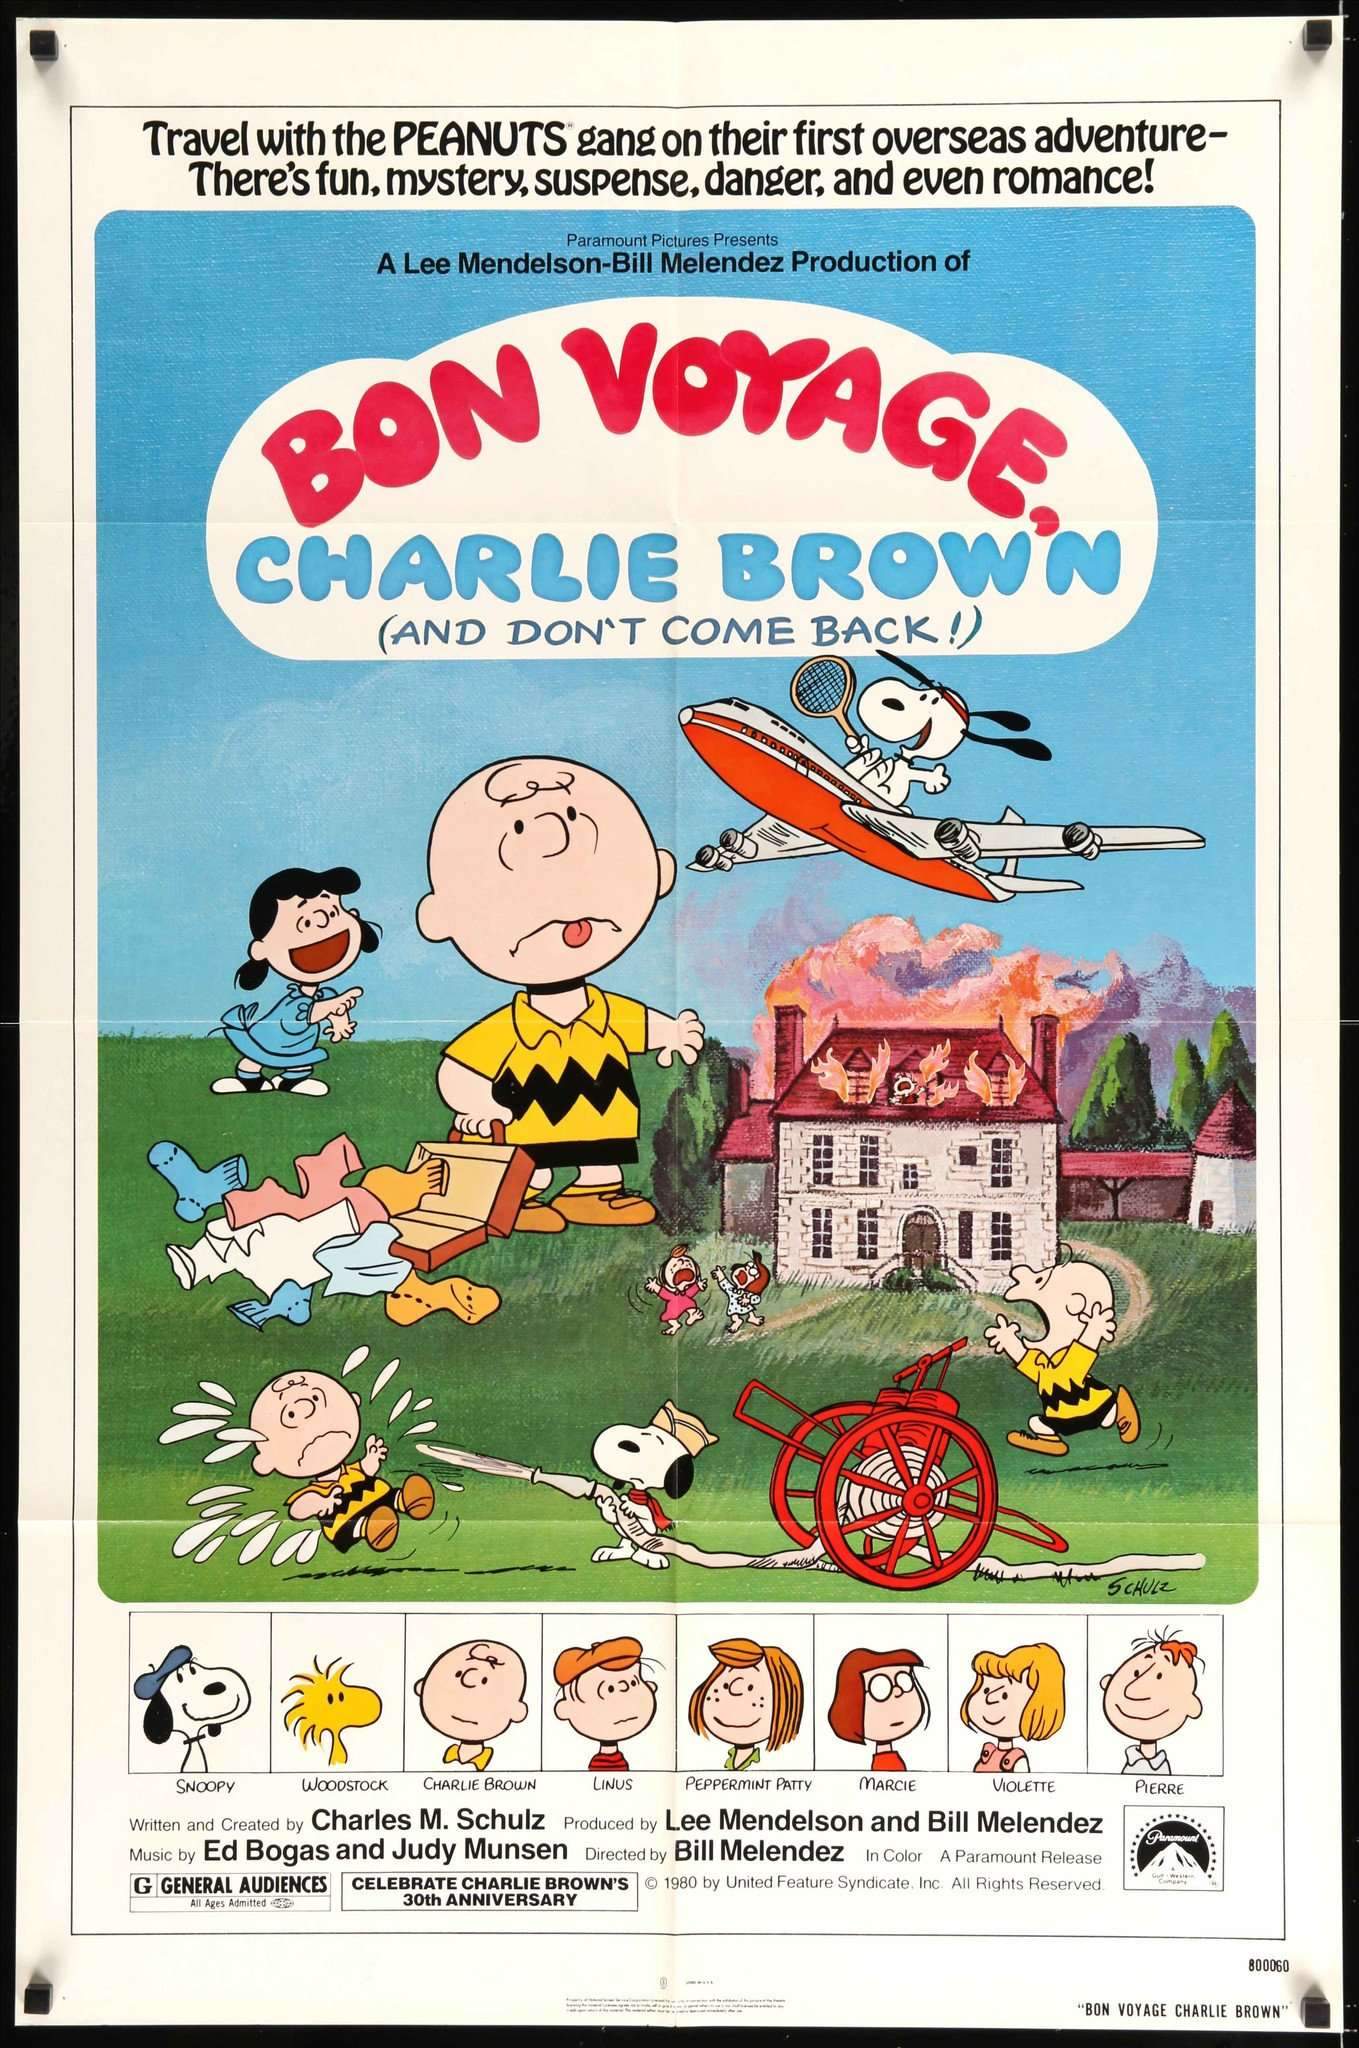 Bon Voyage, Charlie Brown (And Don't Come Back!!) | Peanuts Wiki | Fandom